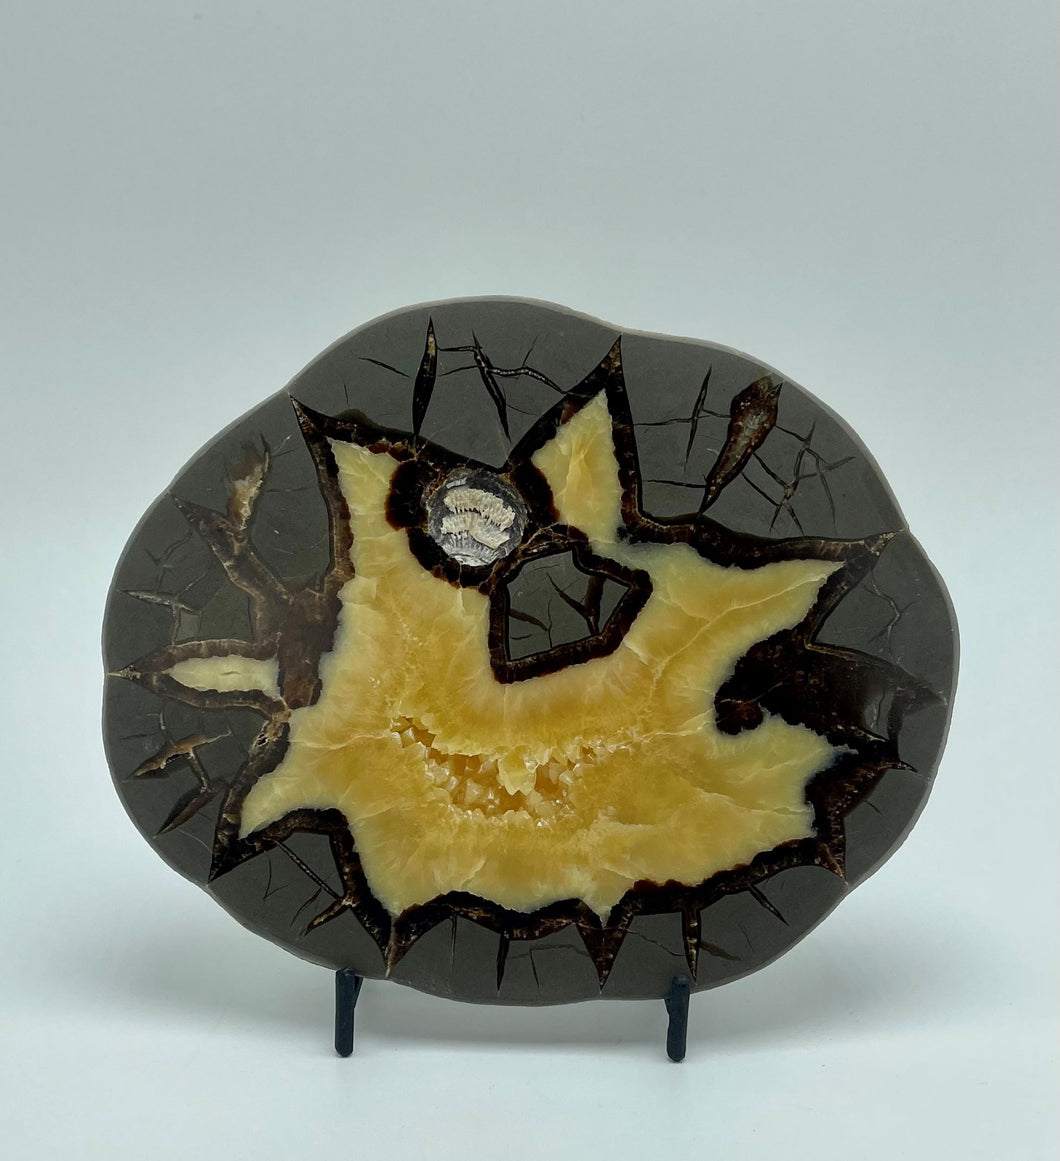 Utah Septarian Slab with Calcite Crystal Hollow and Fossil Imprint 6